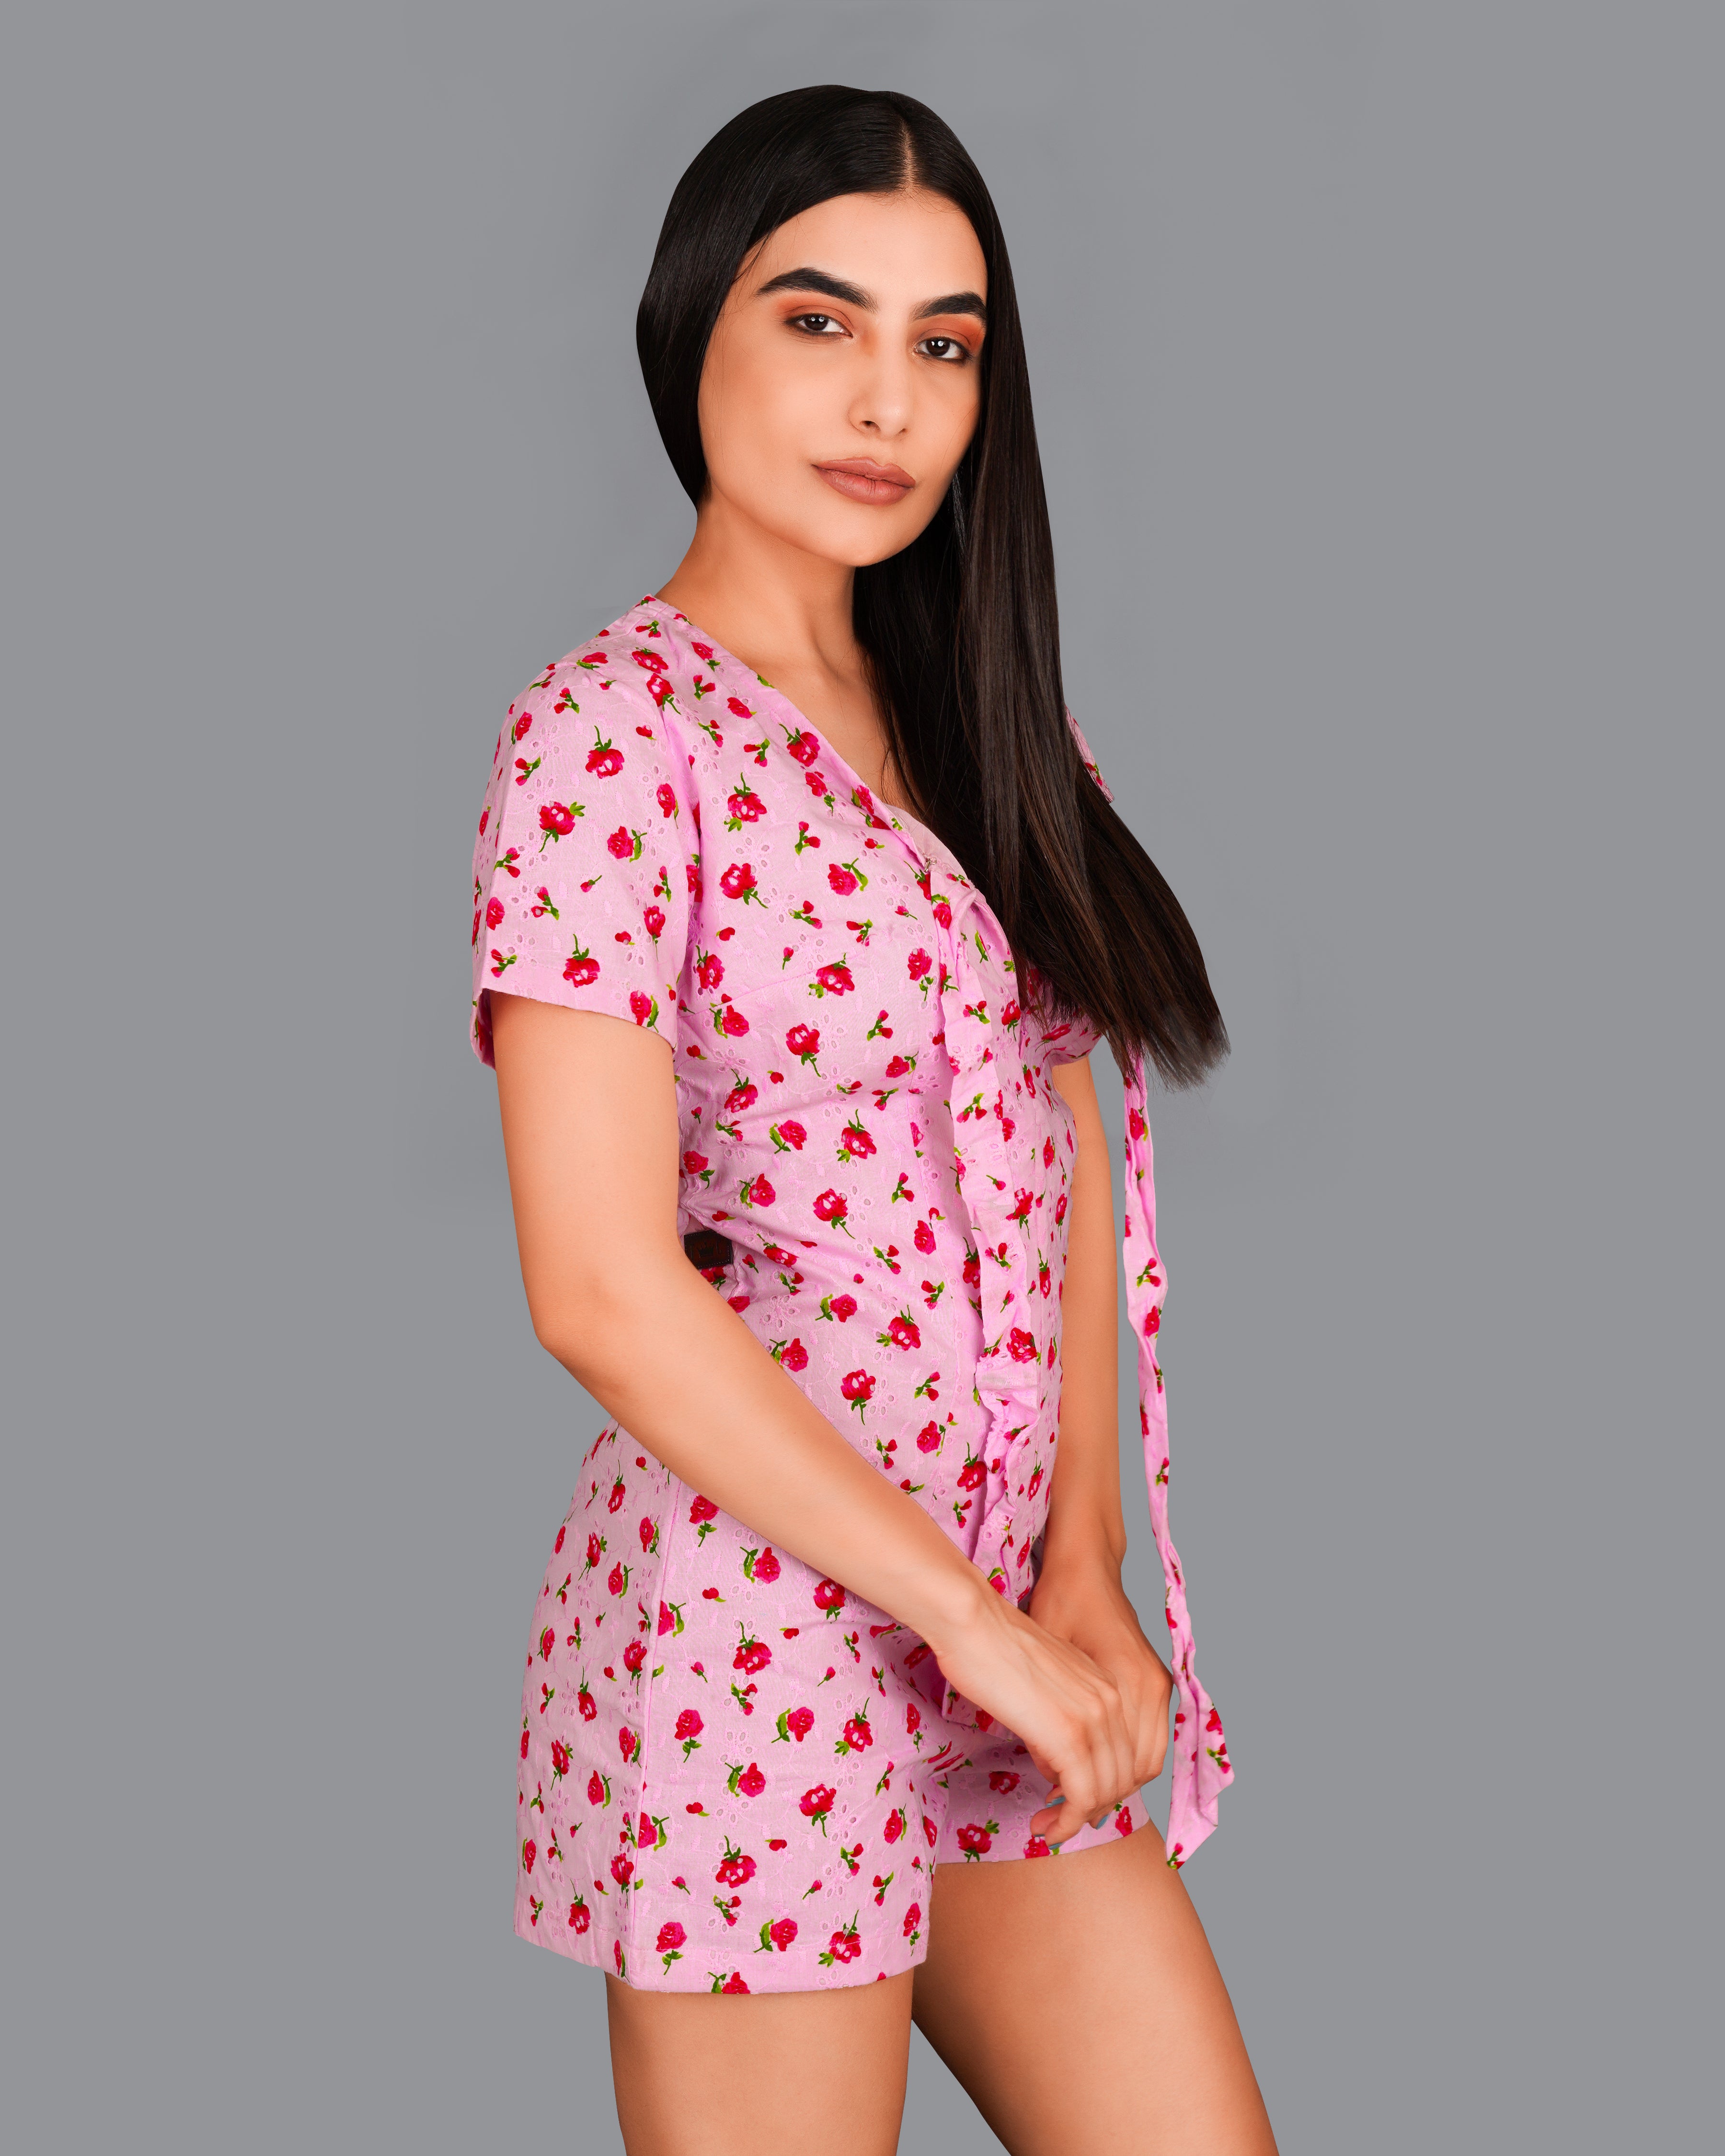 Blossom Pink Rose Printed Premium Cotton Jumpsuit WD007-32, WD007-34, WD007-36, WD007-38, WD007-40, WD007-42